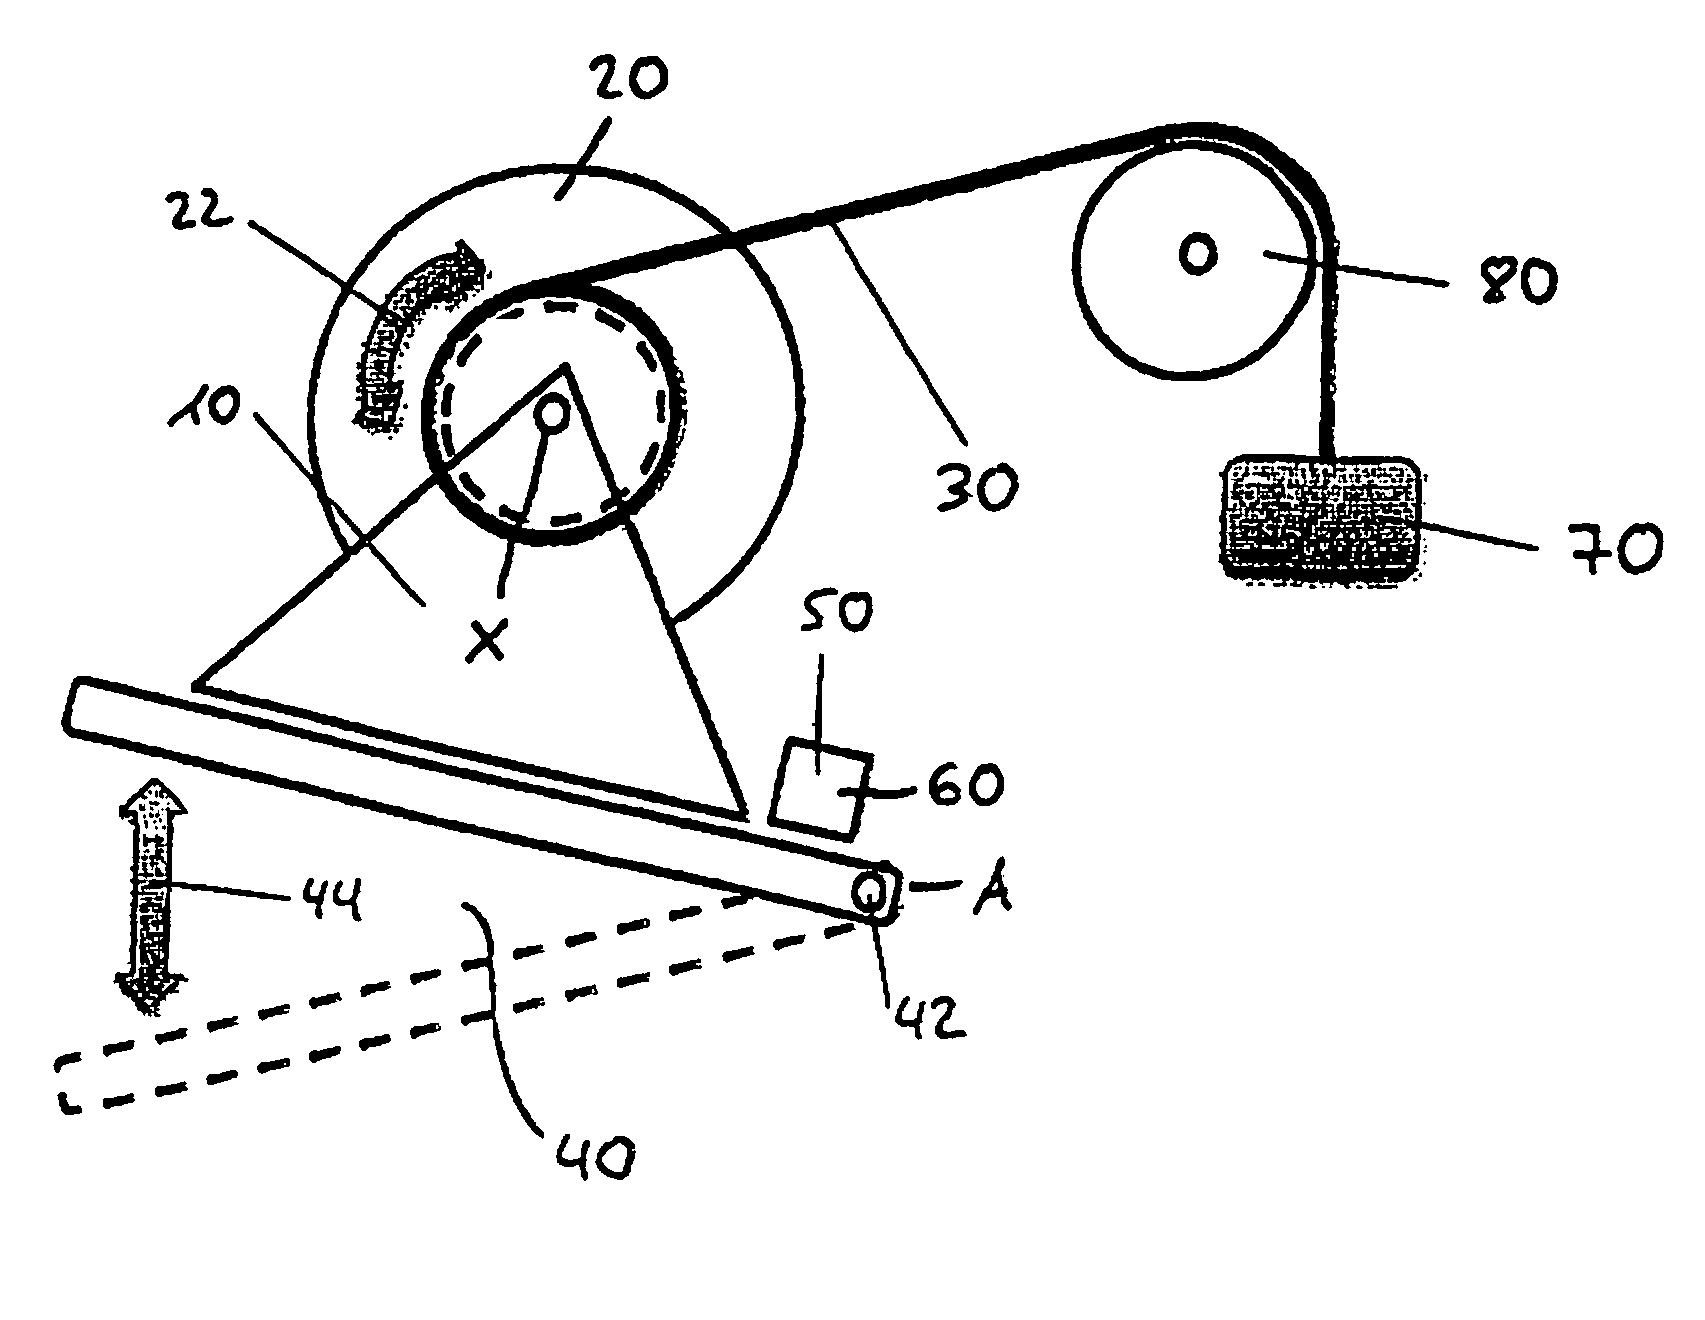 Cable winch device